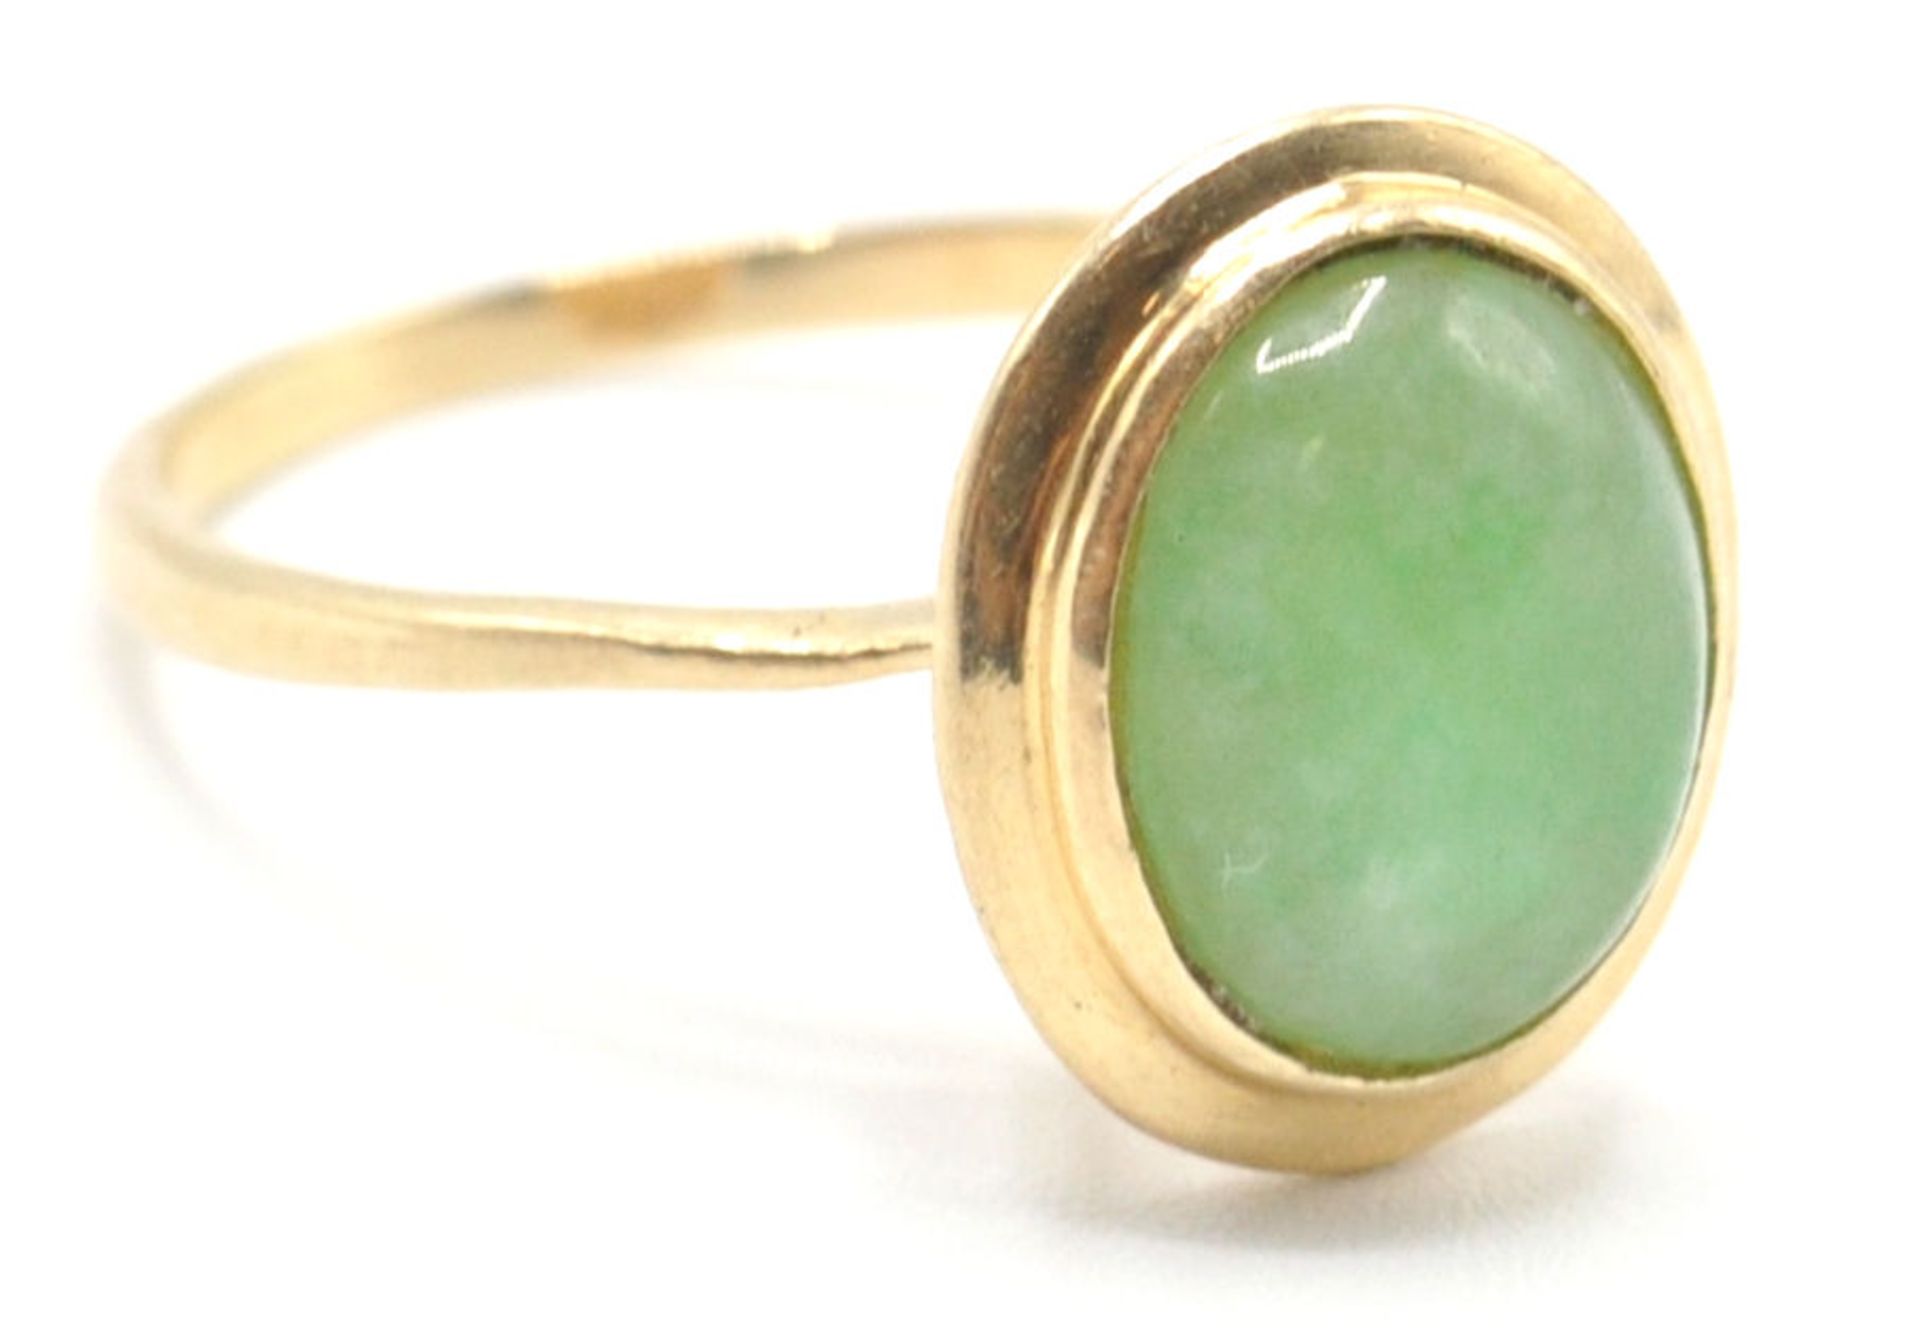 A stamped 585 14ct gold ring being set with an oval jade cabochon in a bezel setting. Weight 2.8g.